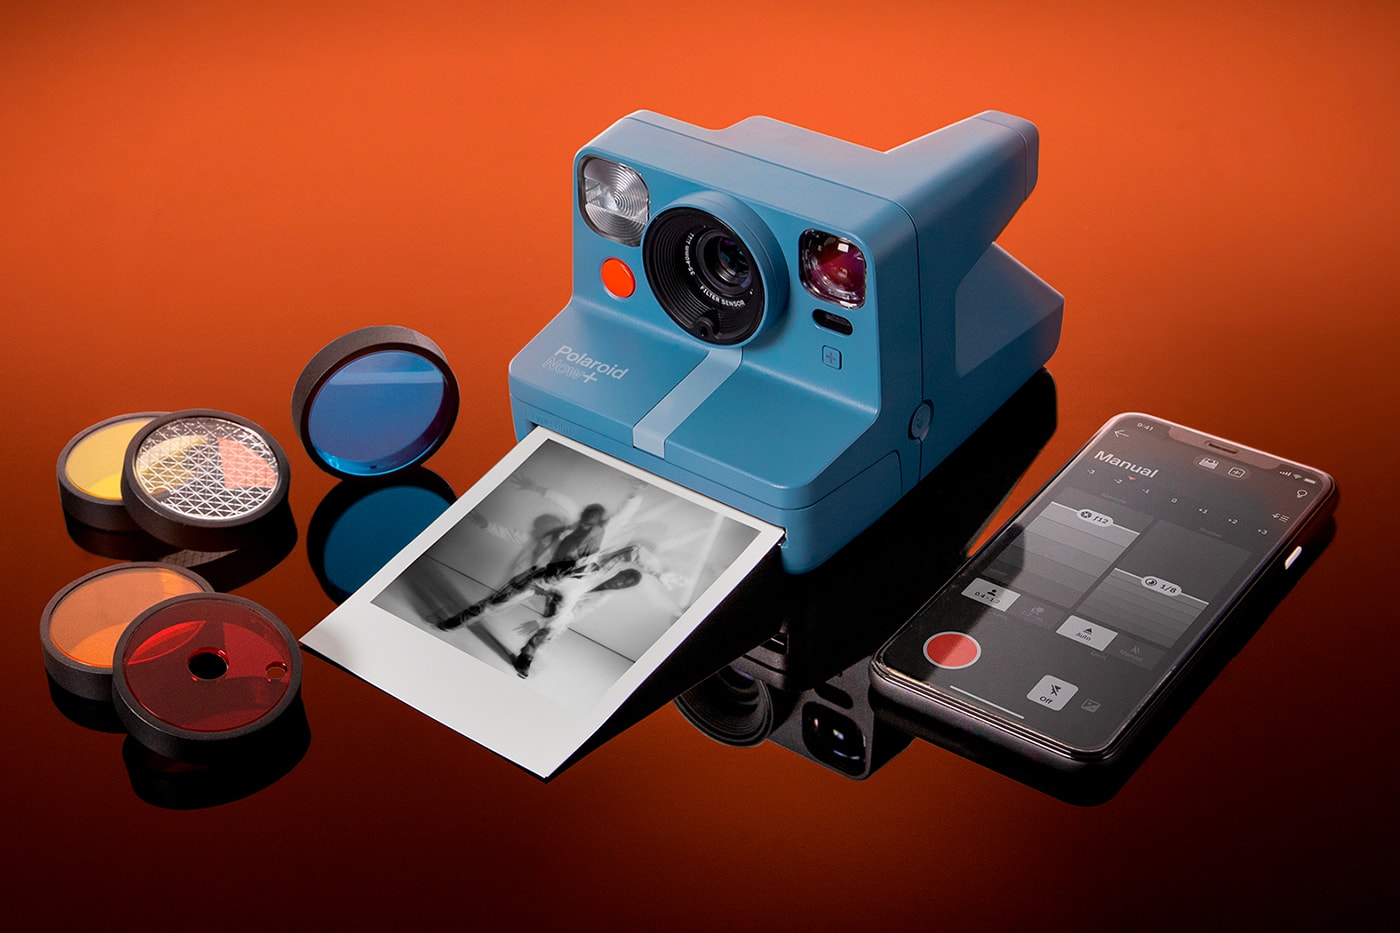 Where could I find the flash add on for this Polaroid 600 Spirit? : r/ Polaroid